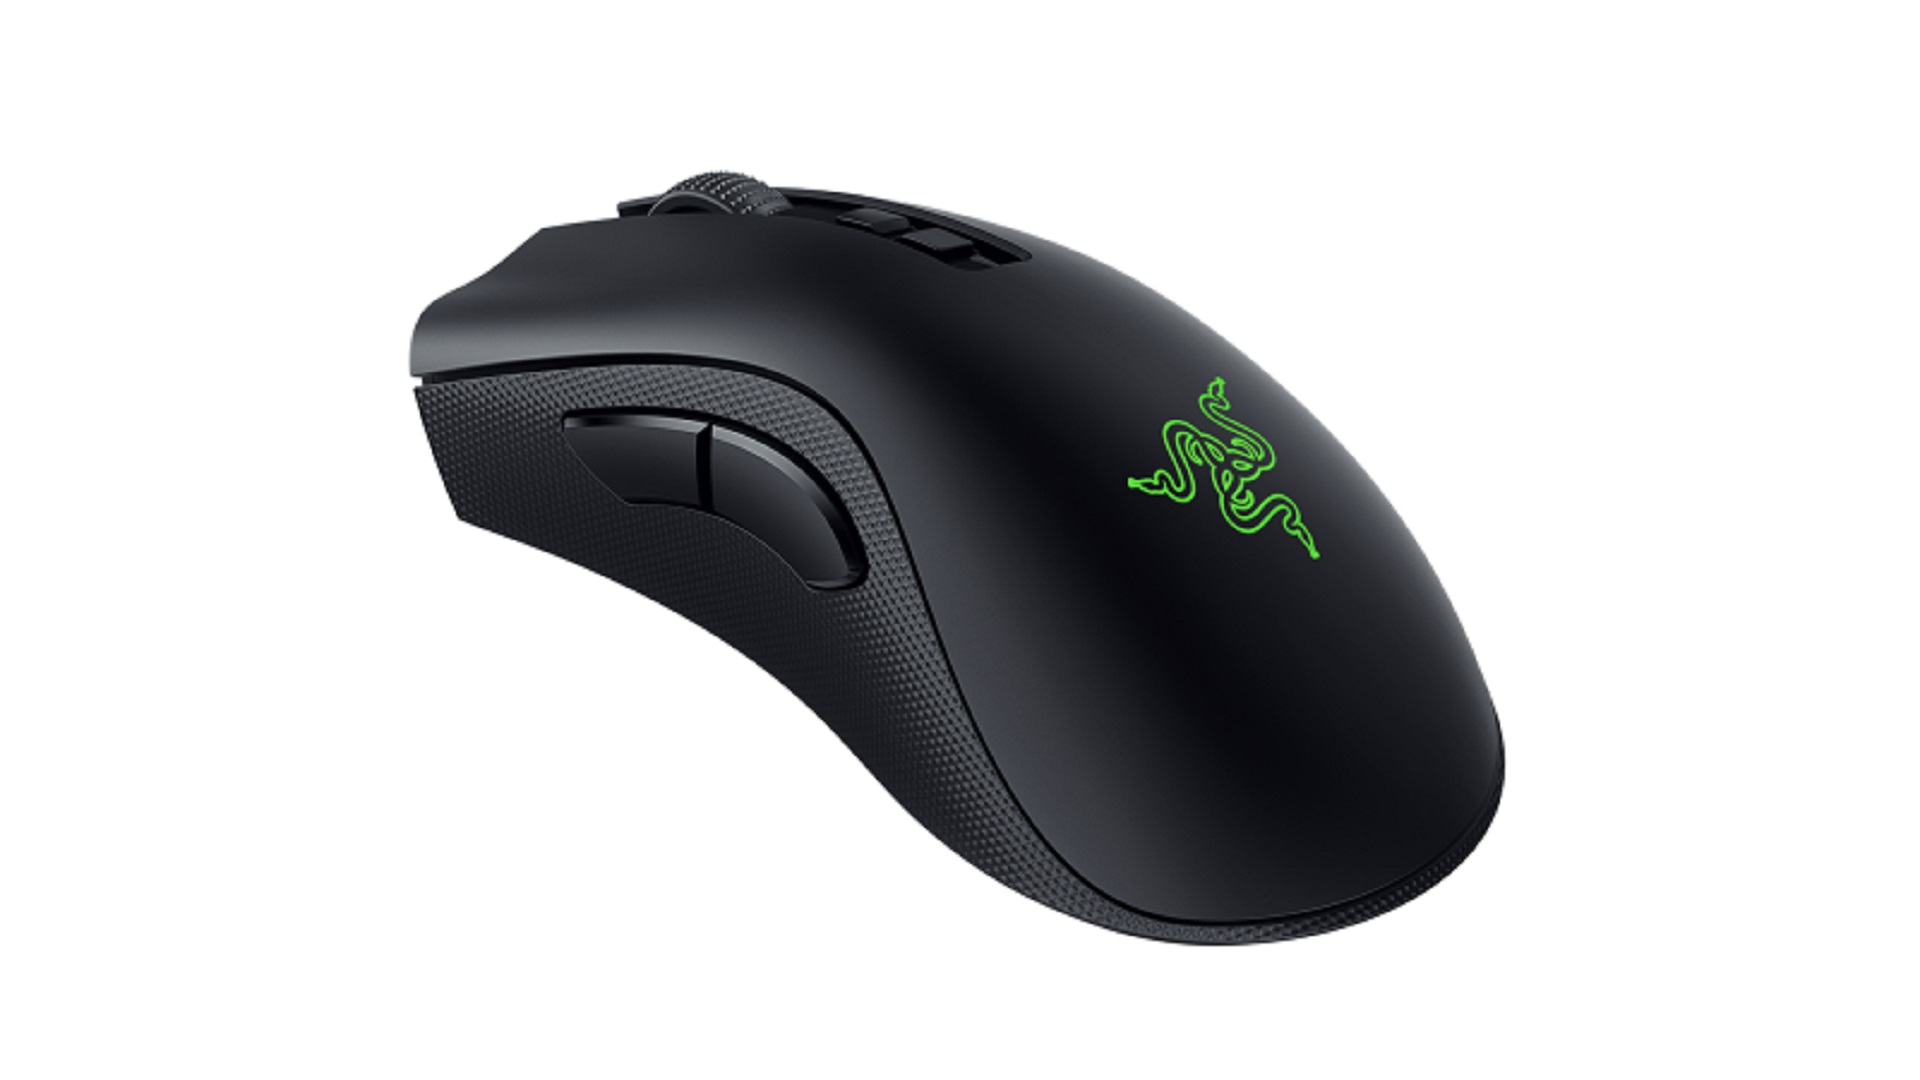 Razer DeathAdder V2 X review: 'great value for money with some sacrifices